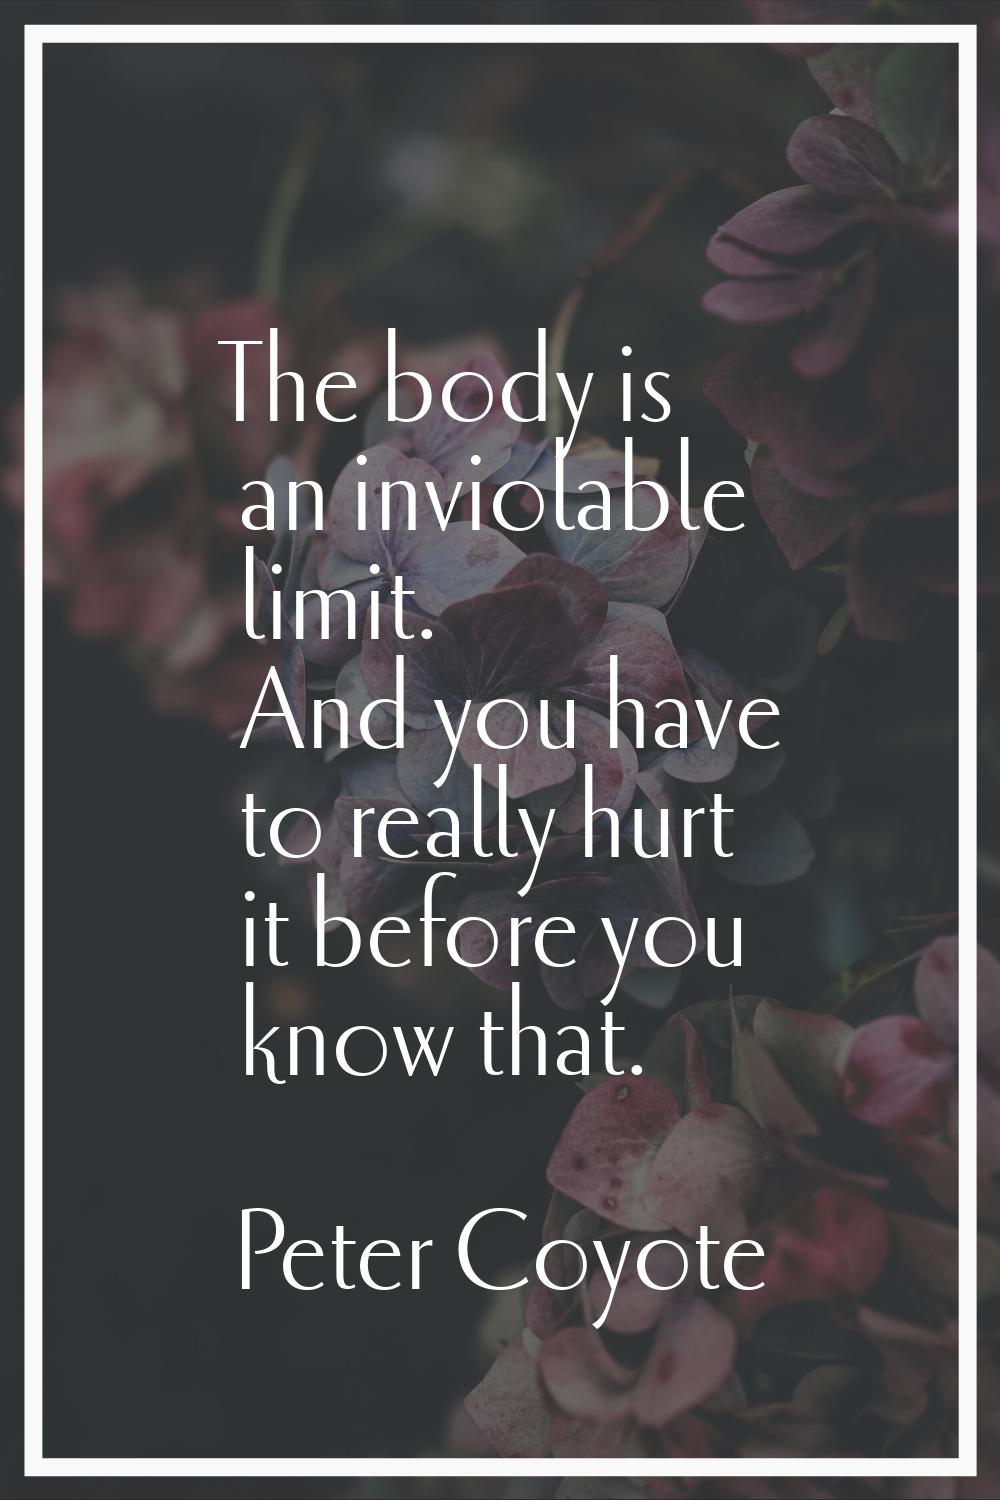 The body is an inviolable limit. And you have to really hurt it before you know that.